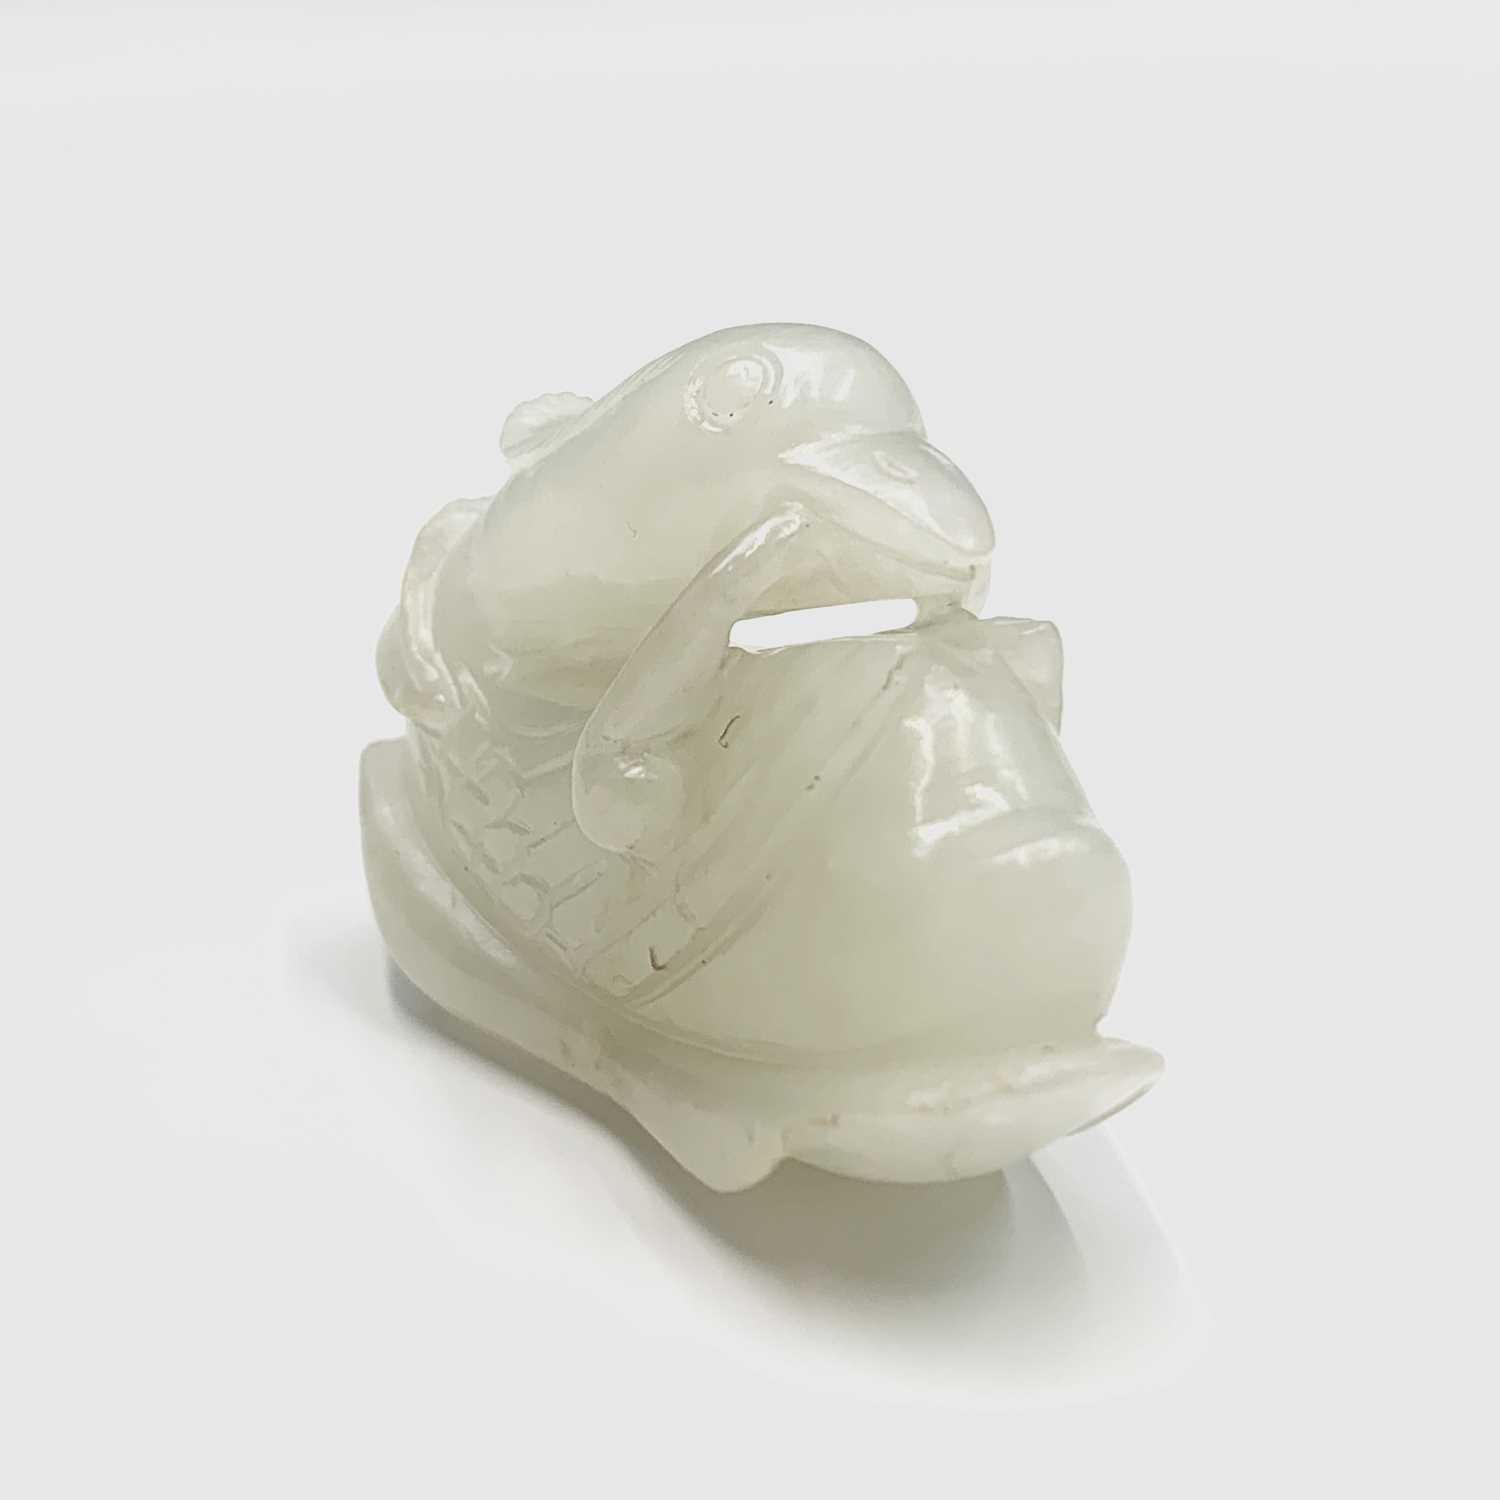 A small Chinese white jade carving of a duck, Qing dynasty, 19th century, height 3cm, width 4.5cm. - Image 11 of 11